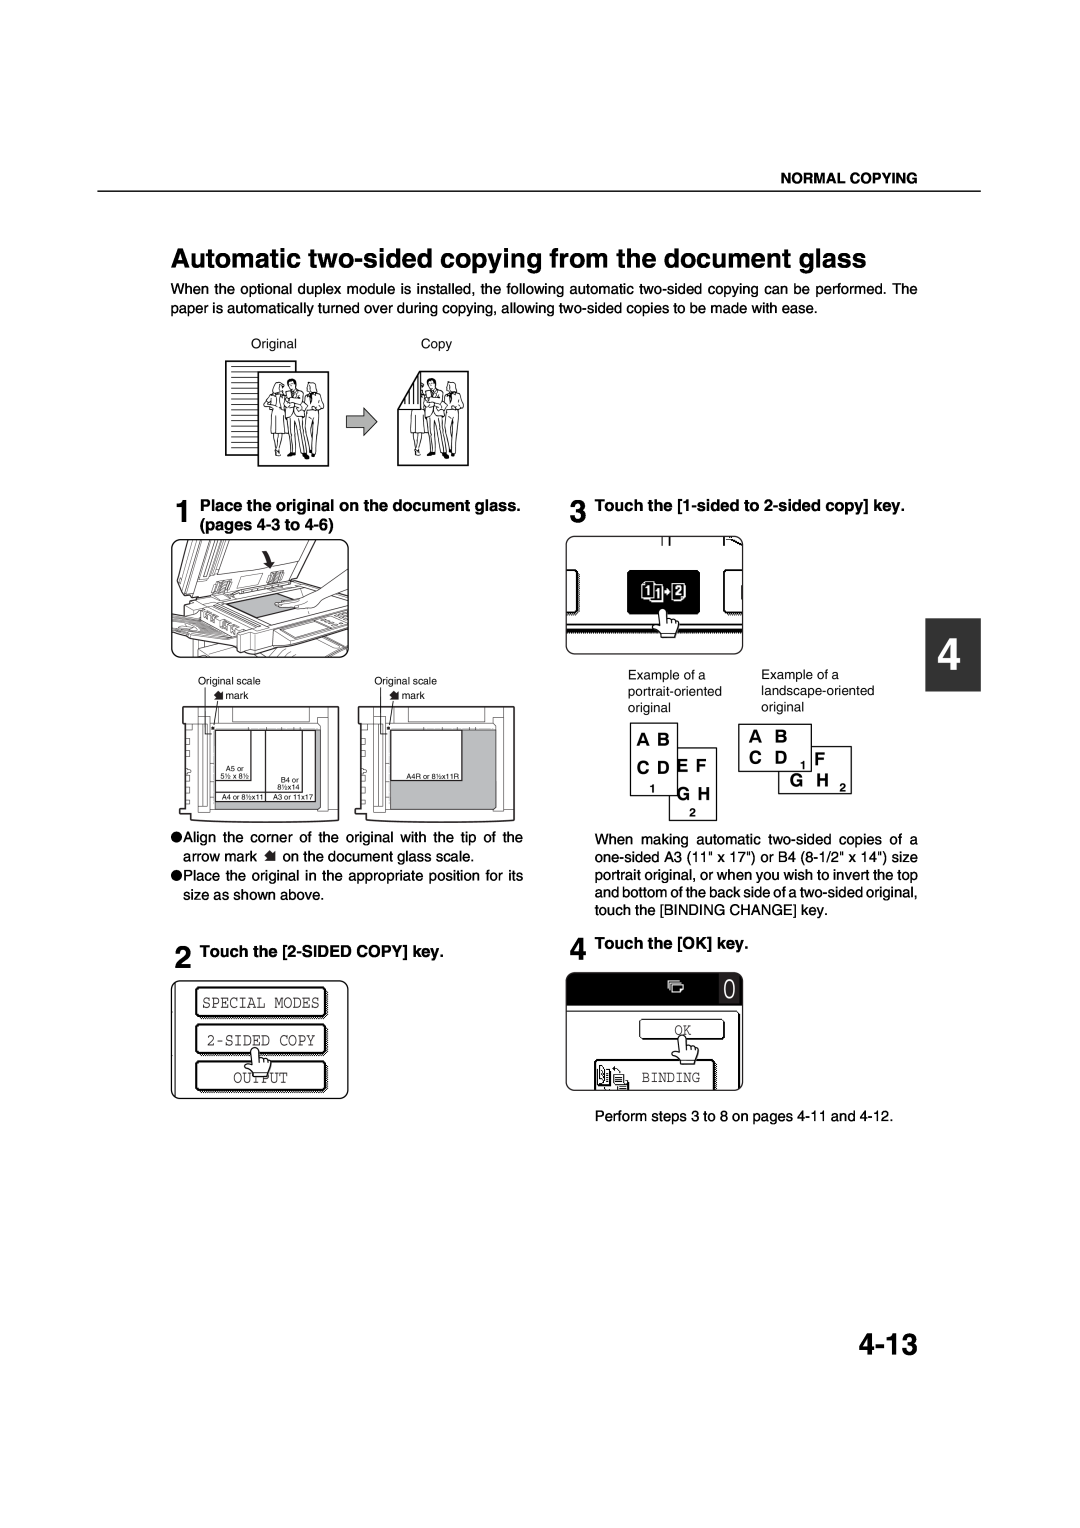 Sharp AR-M451N 4-13, Automatic two-sided copying from the document glass, Touch the 1-sided to 2-sided copy key, Binding 